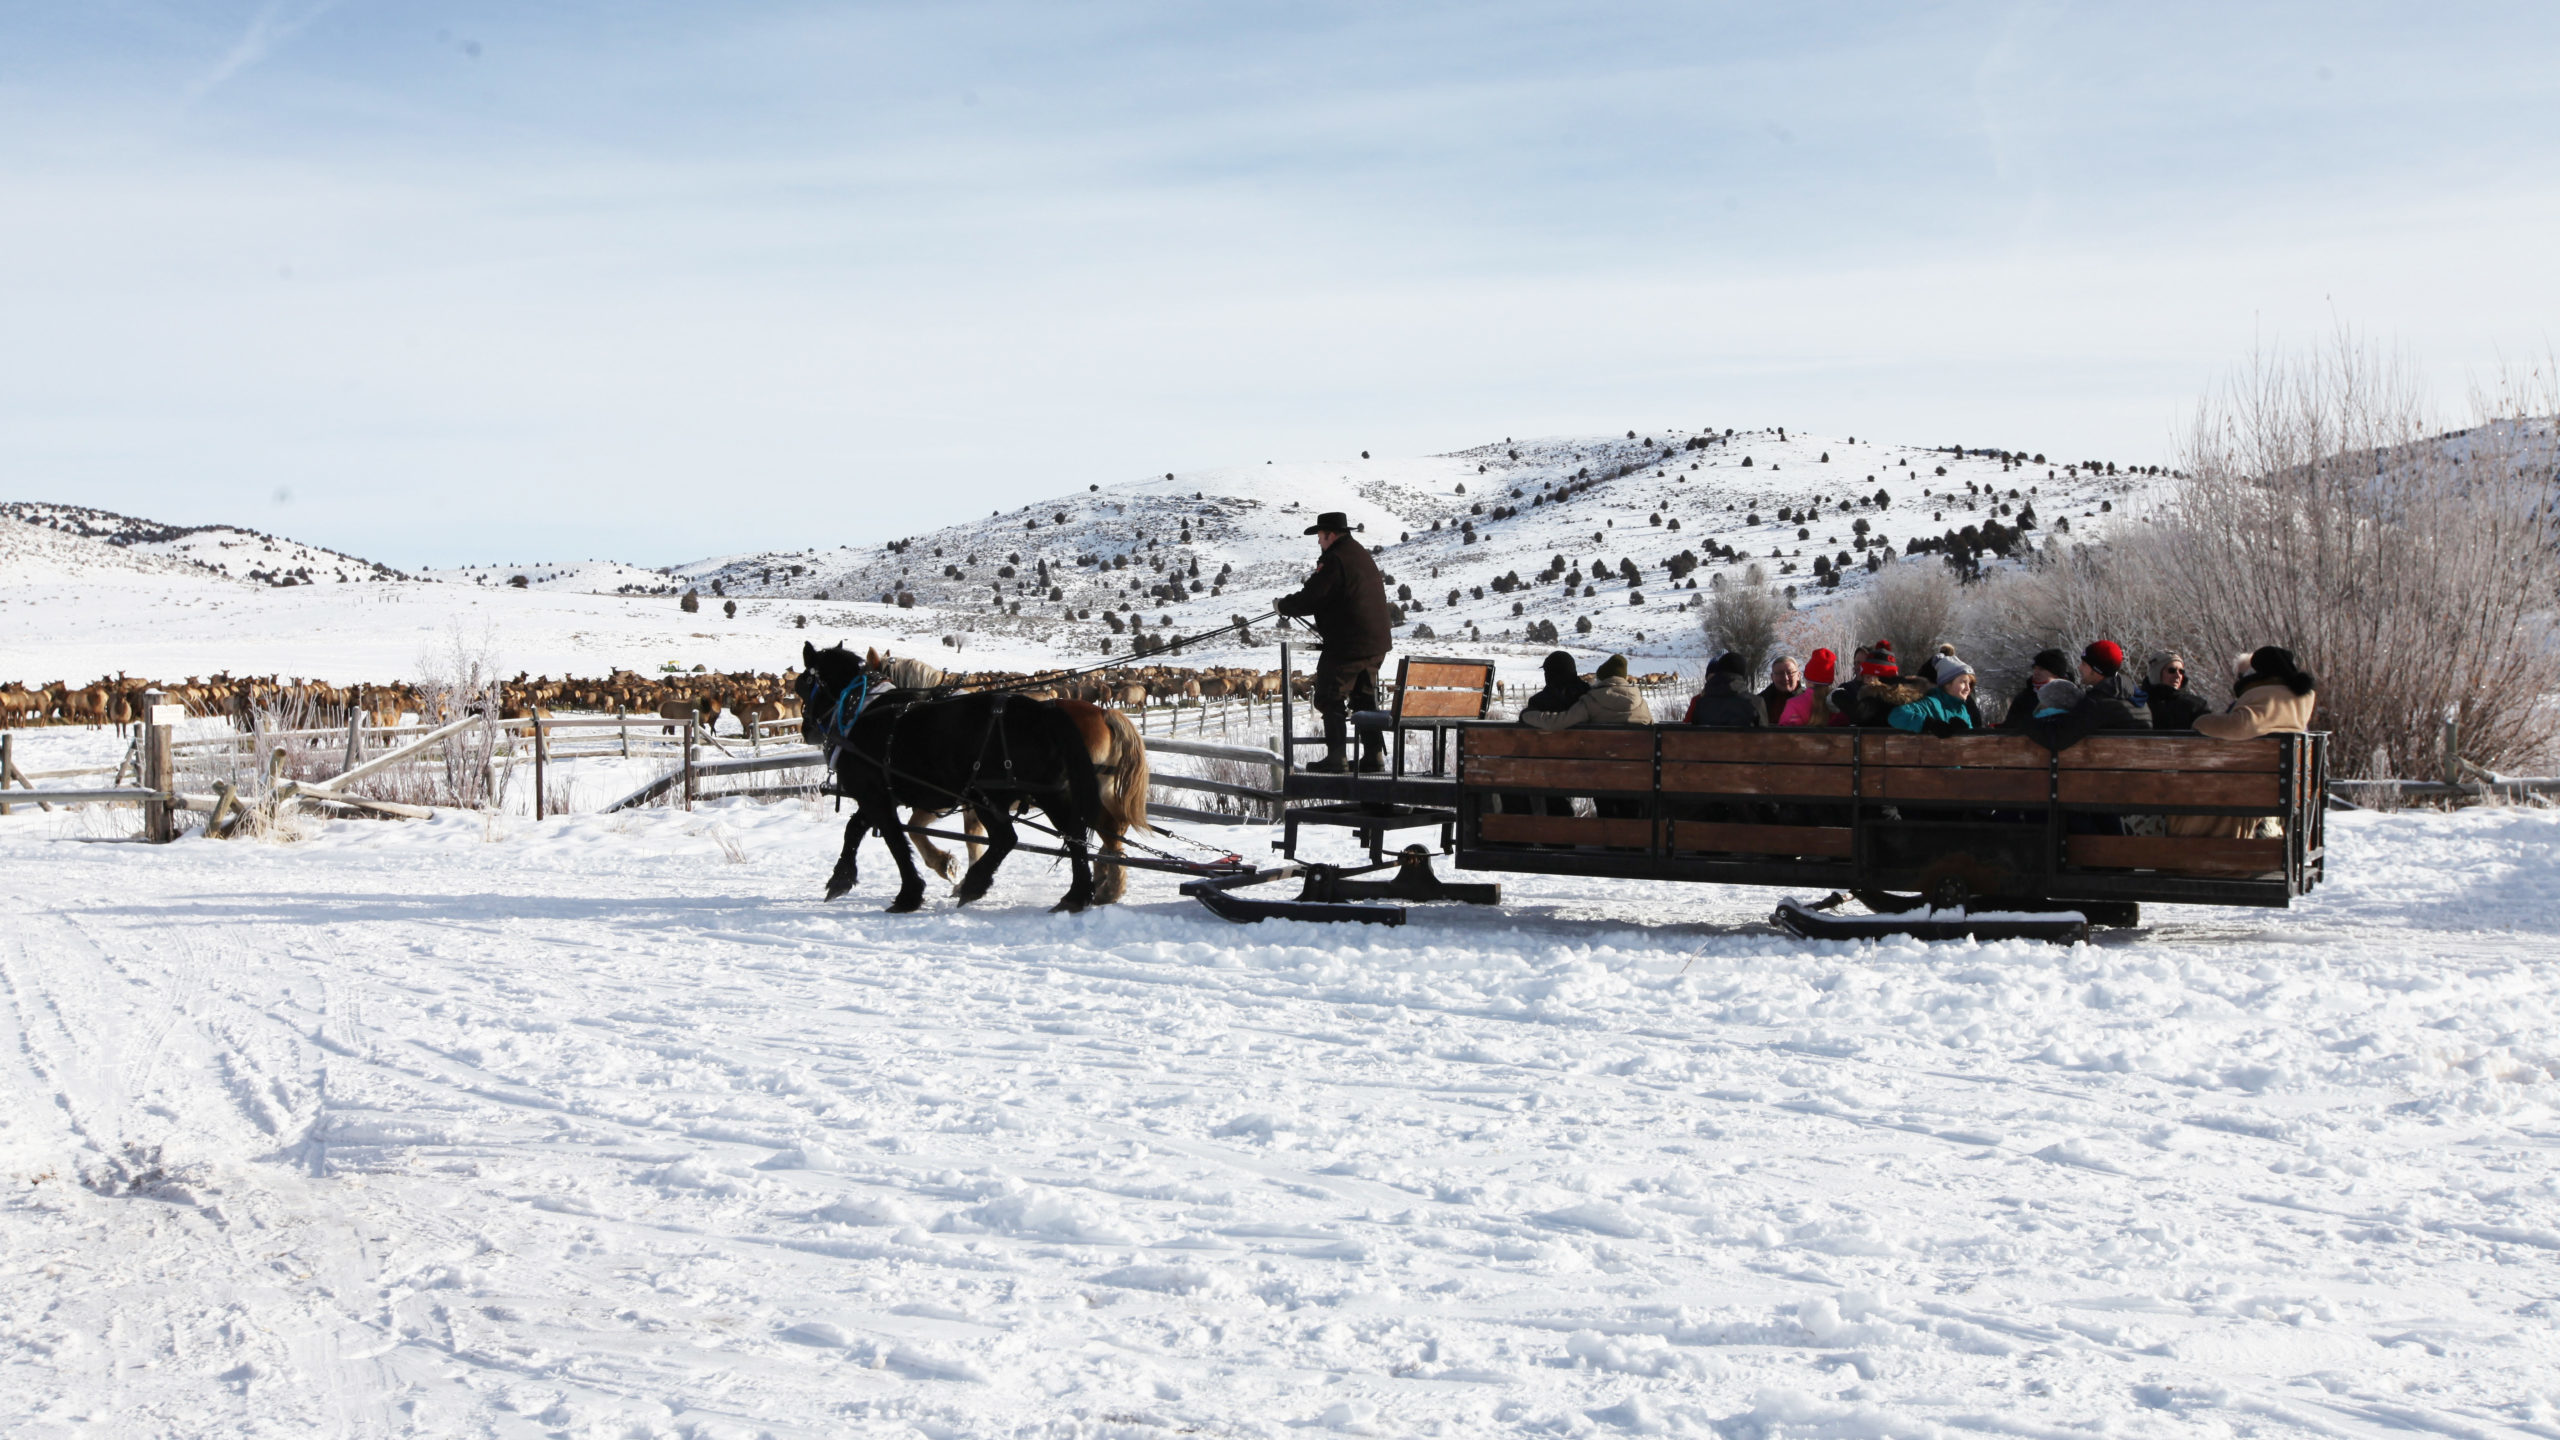 sleigh rides in utah are pictured, a horse drawn sleigh is pictured...